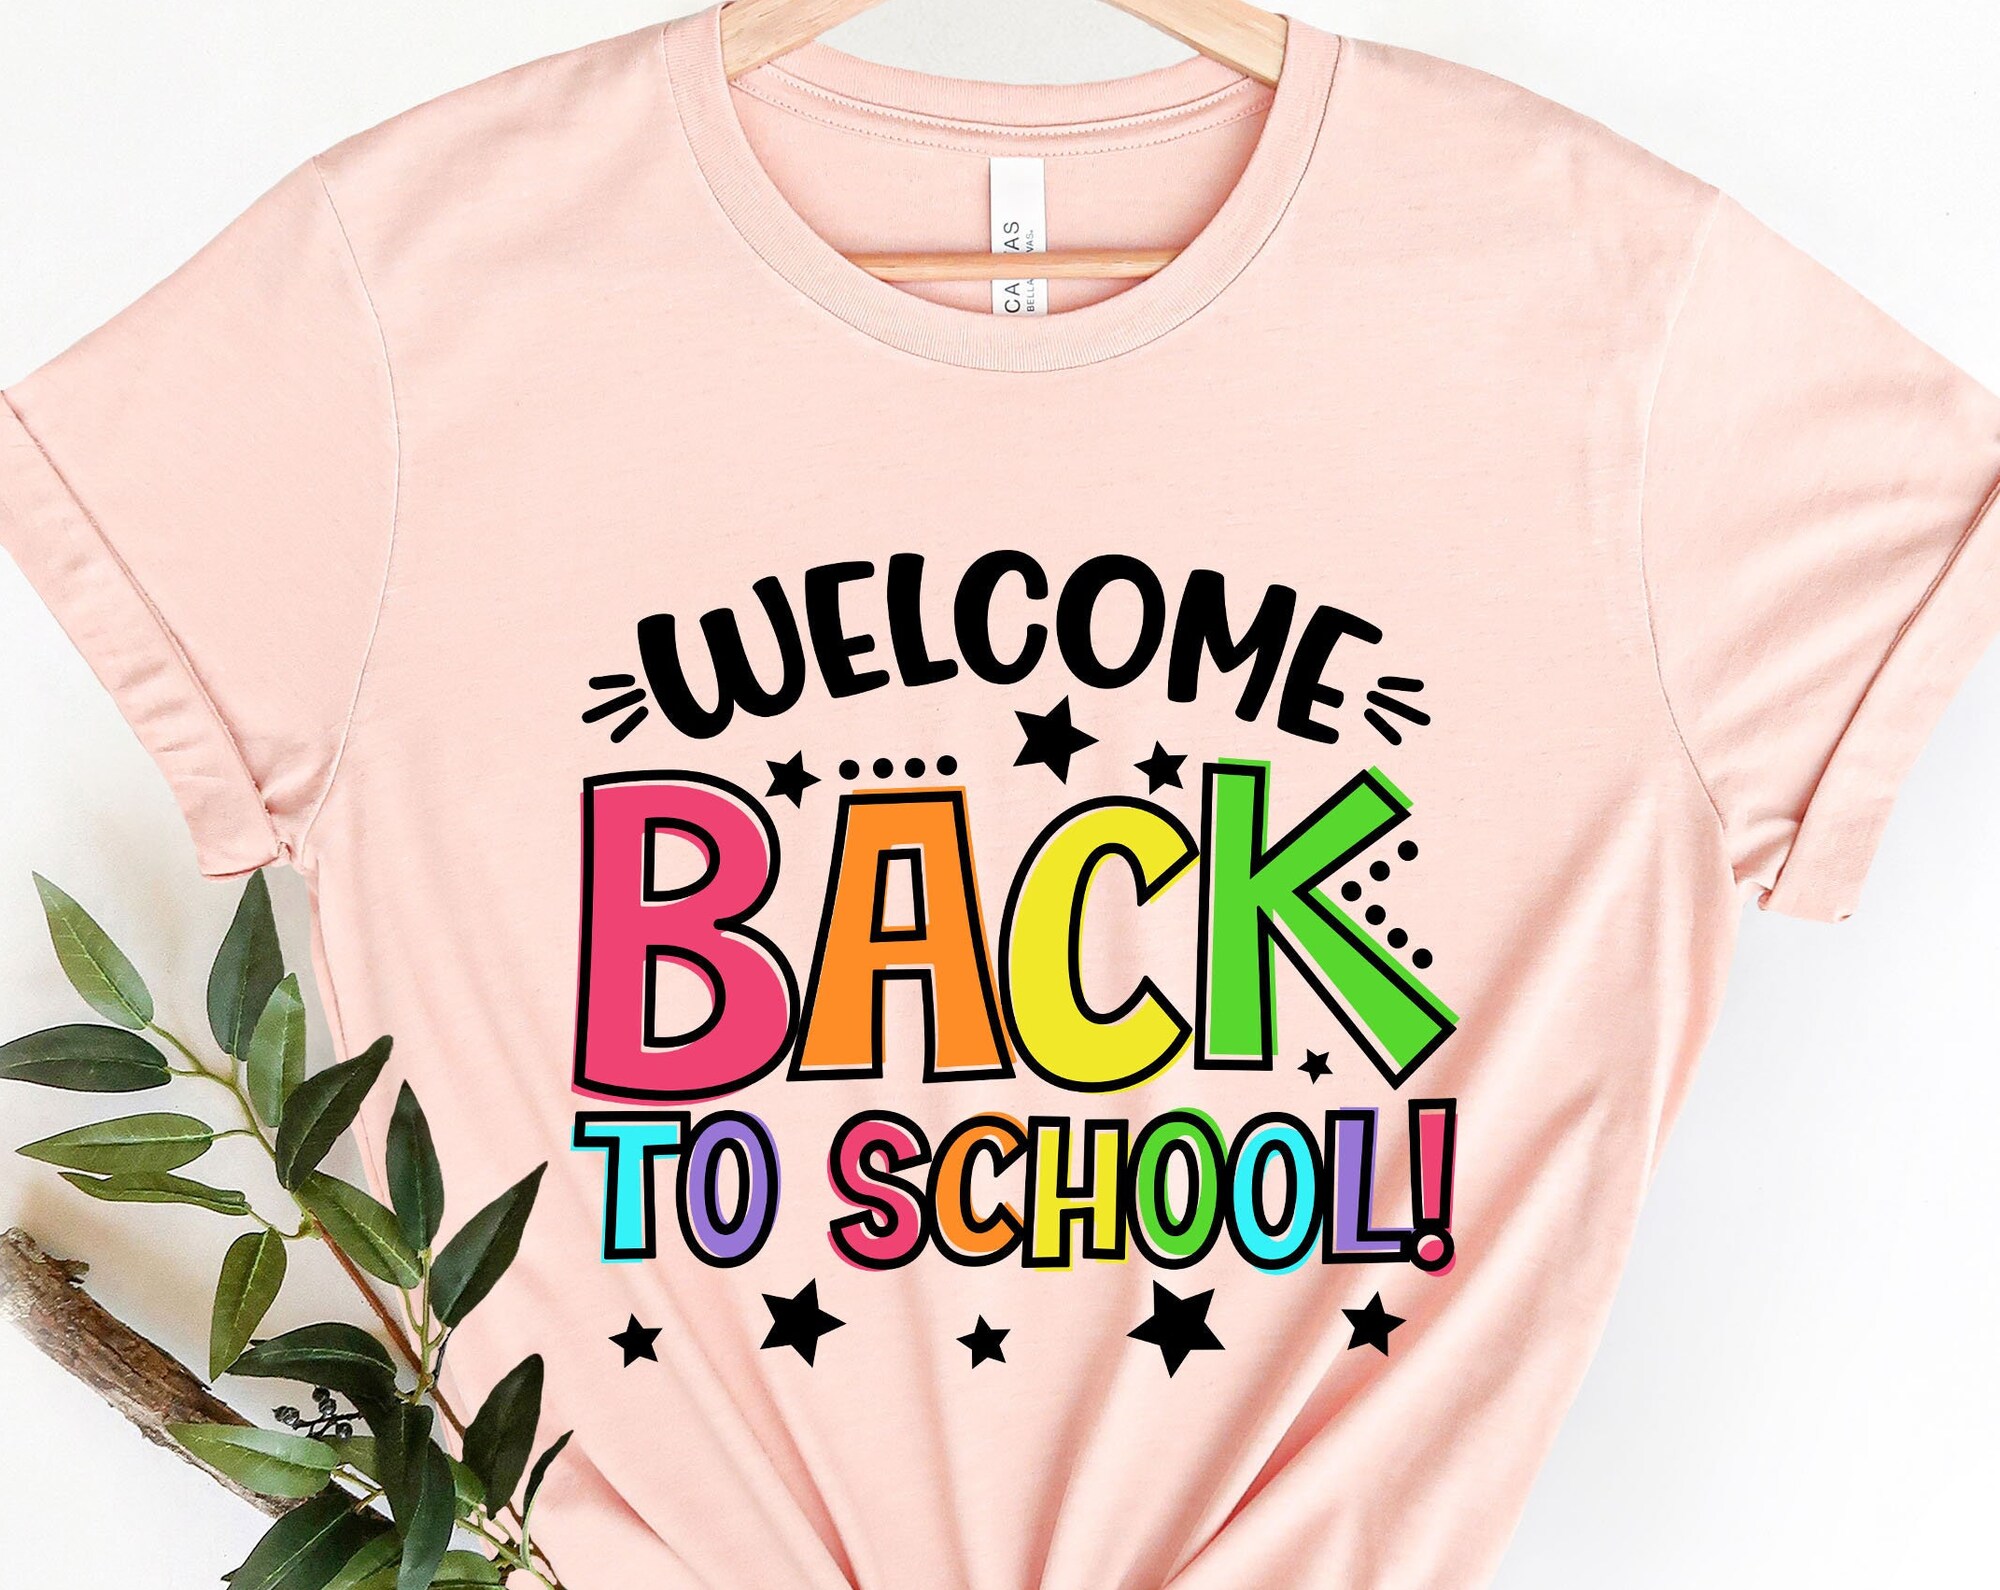 Discover Welcome Back To School Shirt | First Day of School Shirt, Back To School Shirt